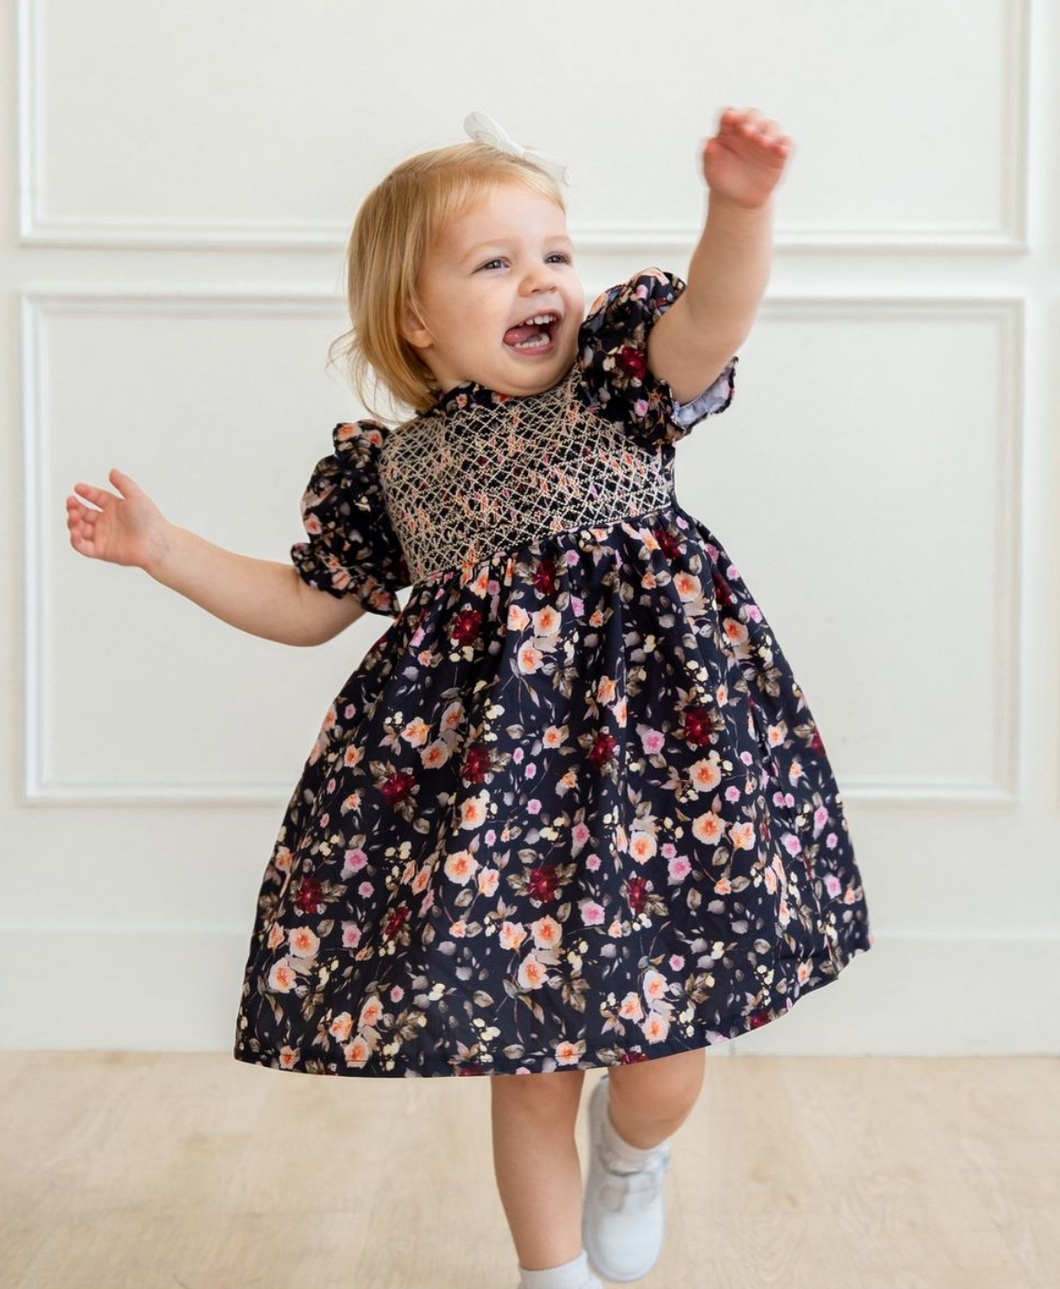 Fall Floral 23 - Margie Dress